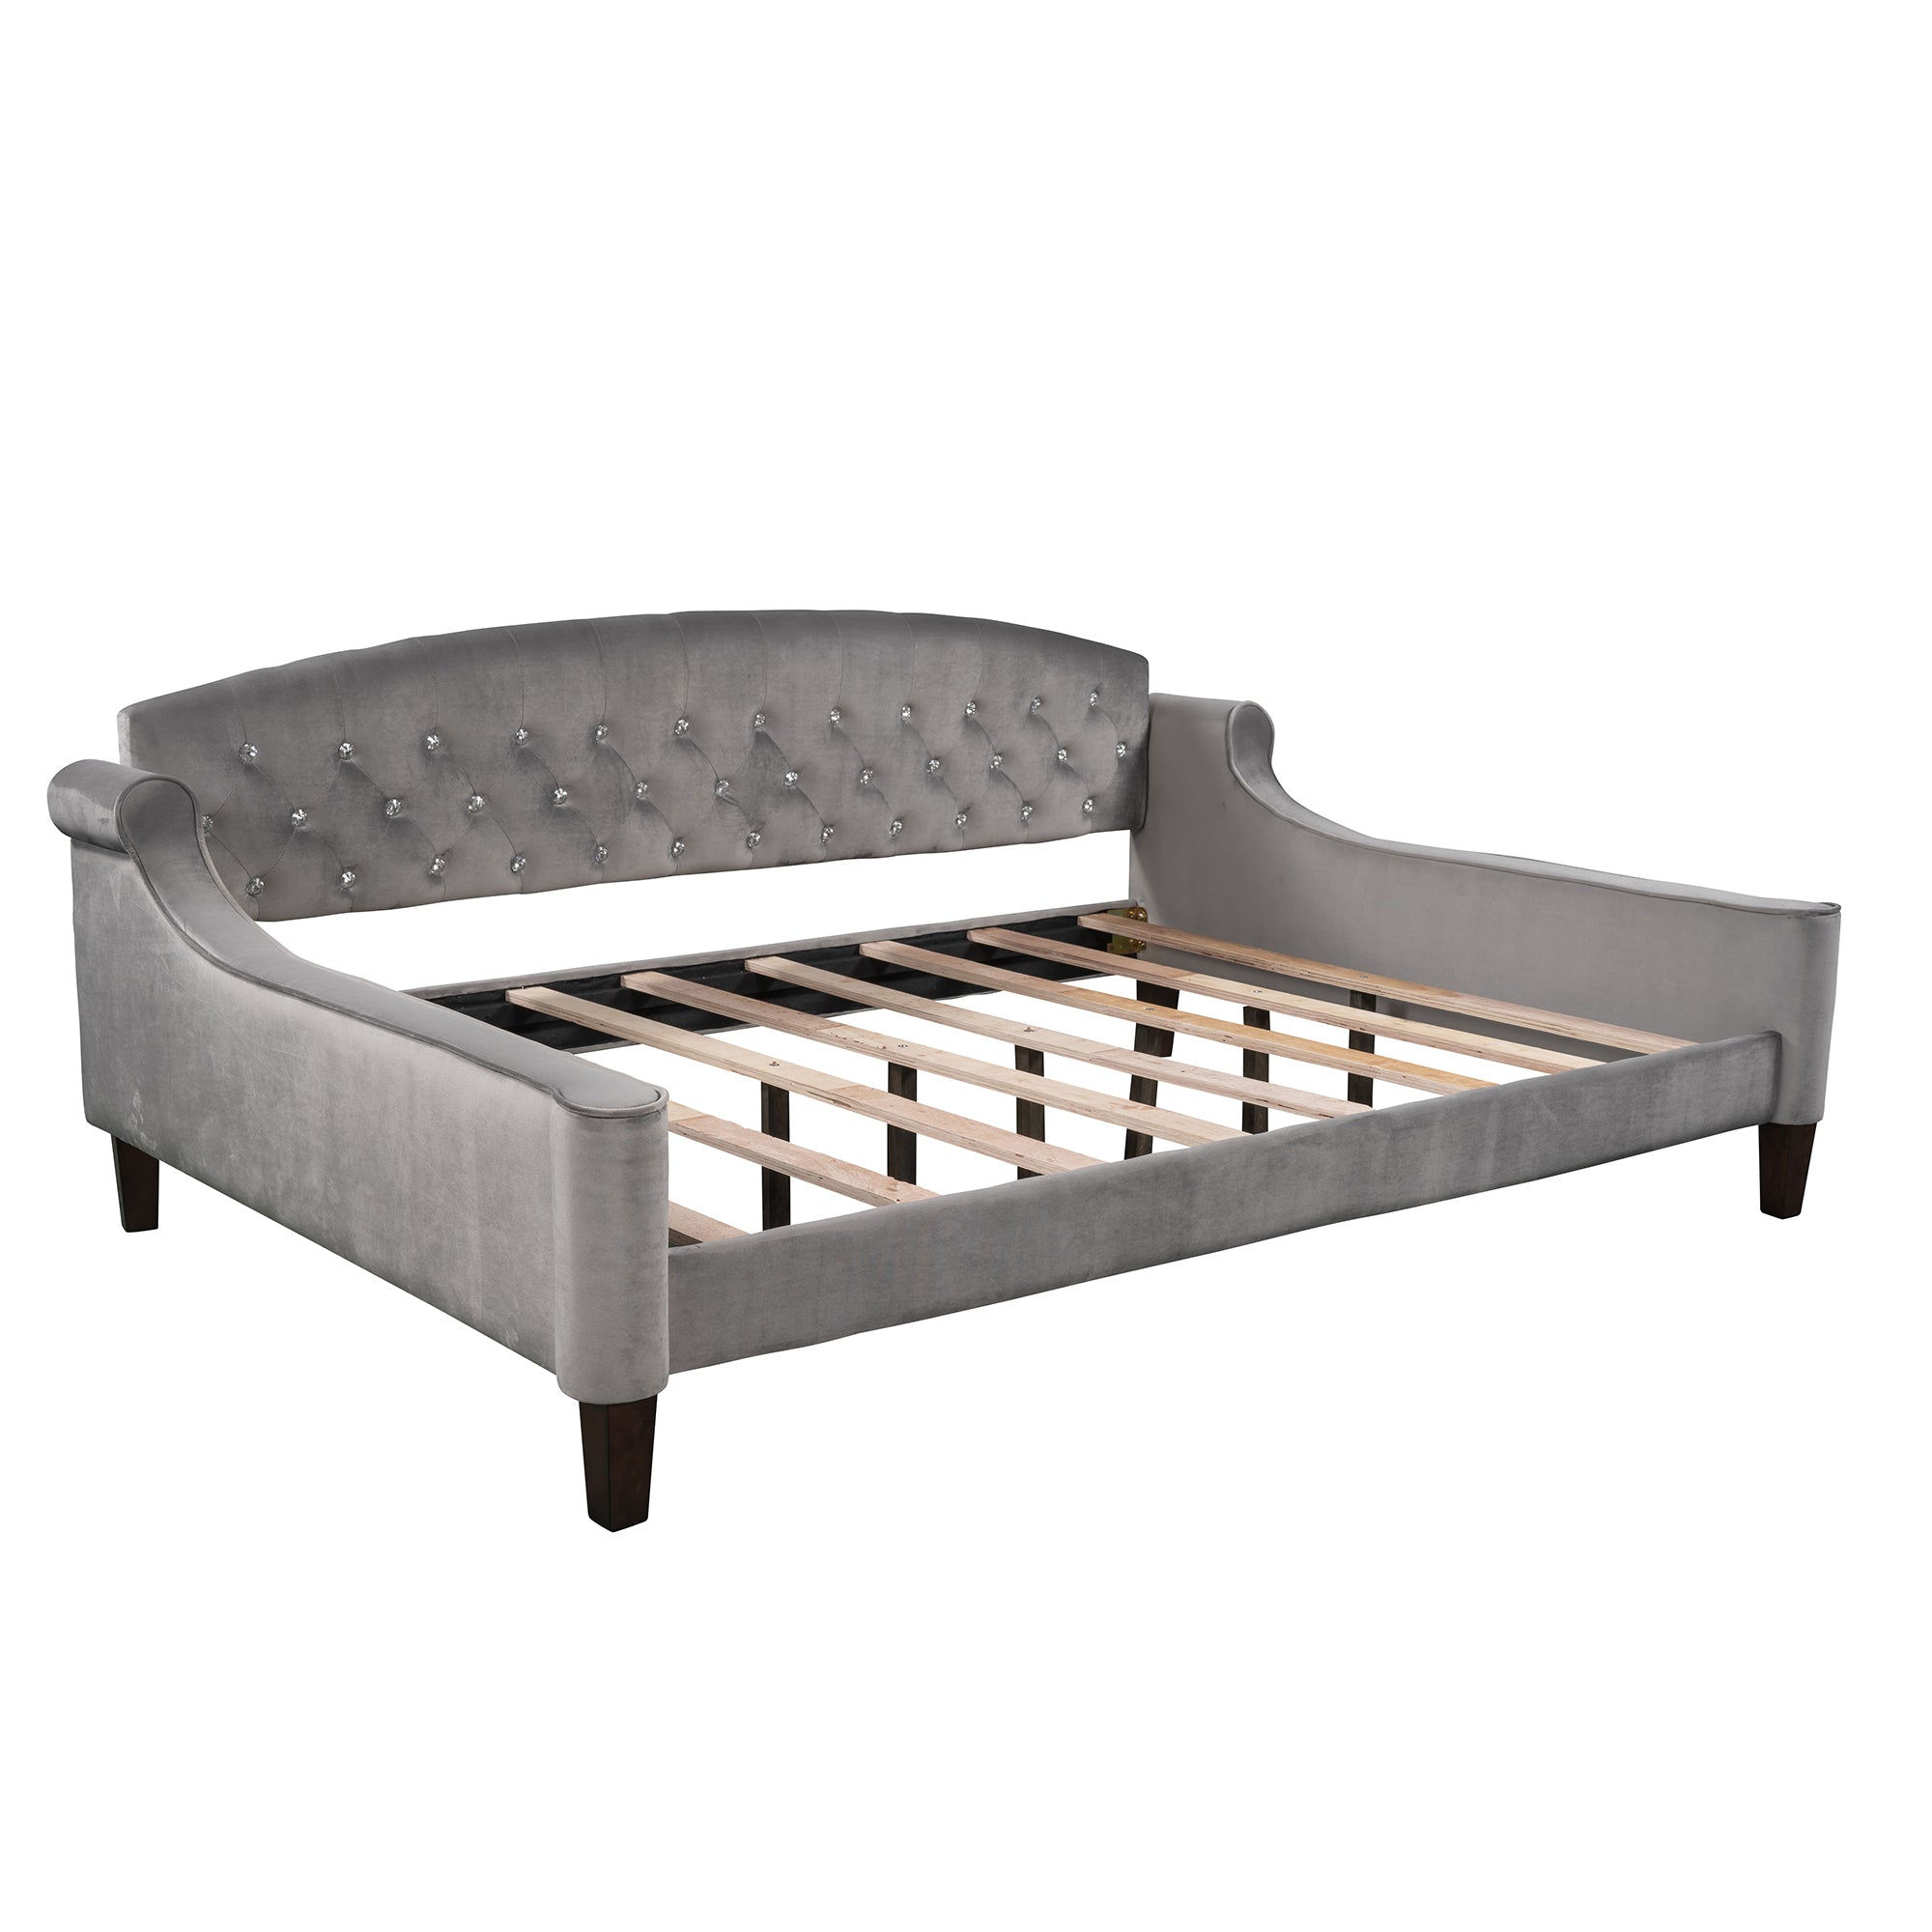 Full size Tufted Button Daybed (Gray)